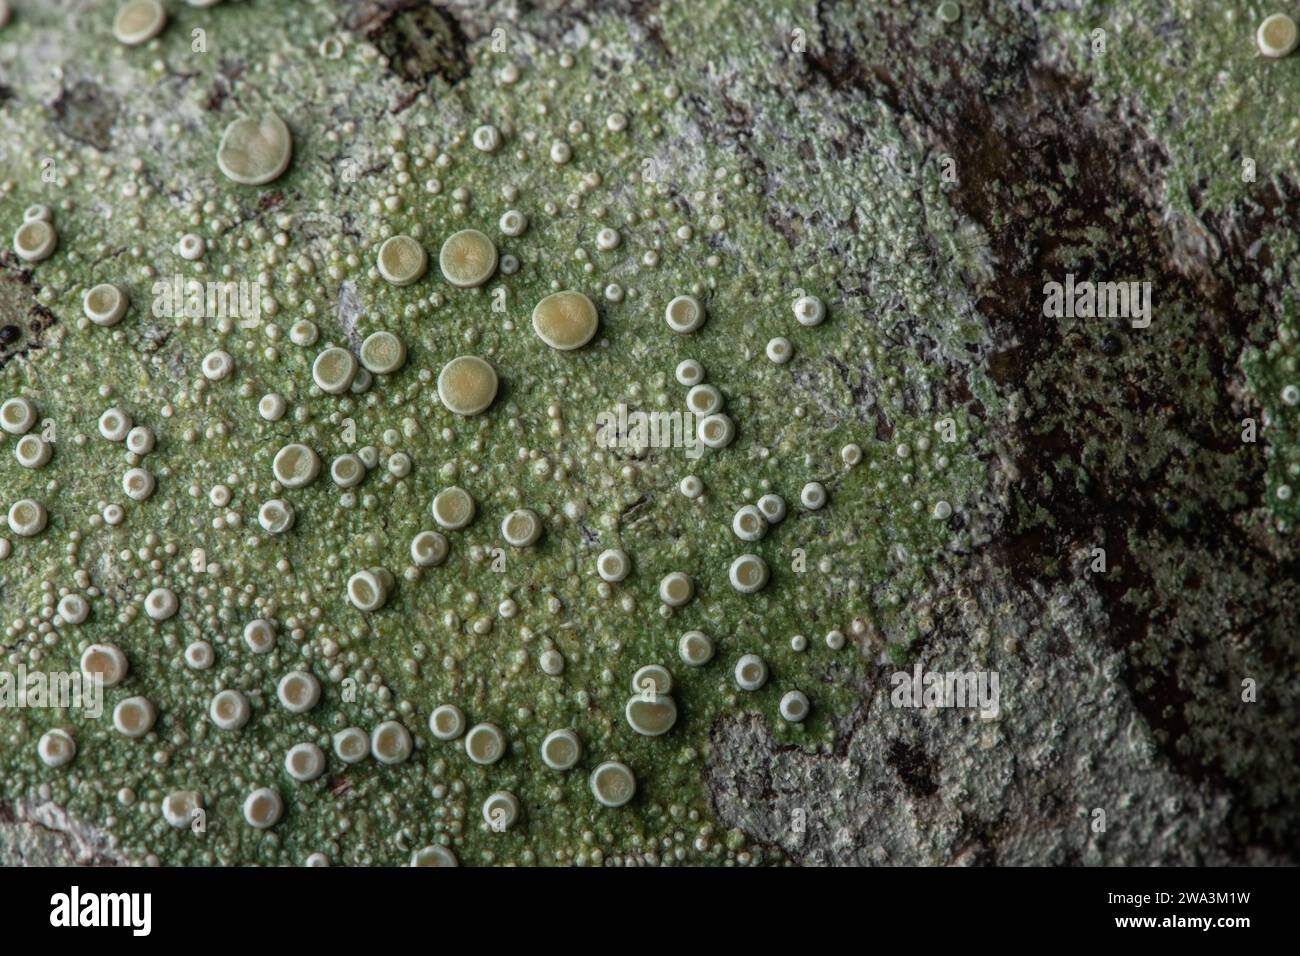 A high resolution macro close up image of crustose lichen with fruiting bodies grows on tree bark in the Santa Cruz mountains of California. Stock Photo